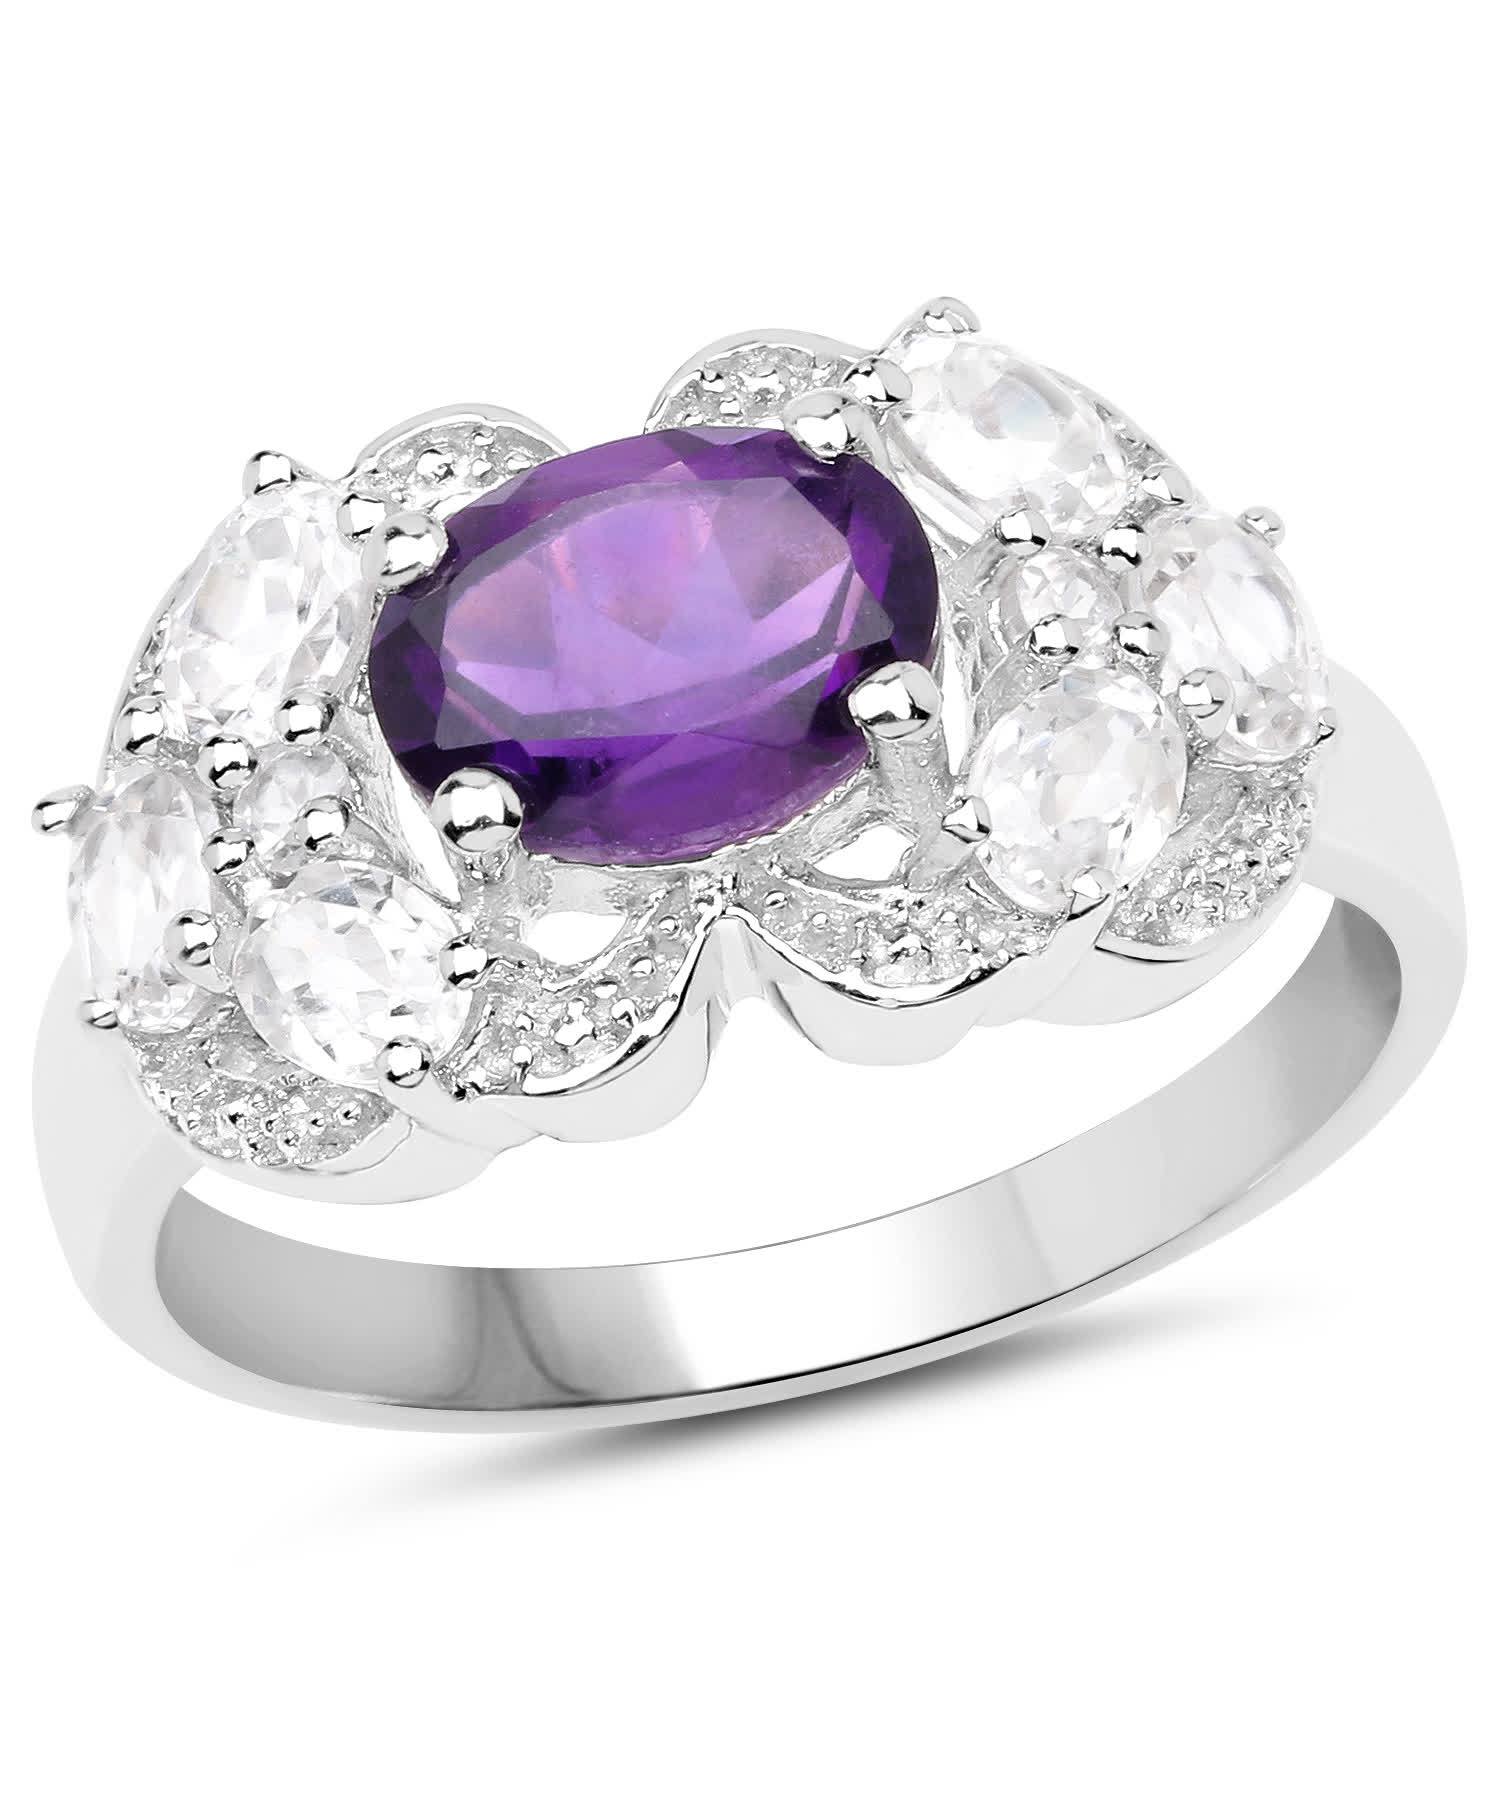 2.75ctw Natural Amethyst and Zircon Rhodium Plated 925 Sterling Silver Ring View 1